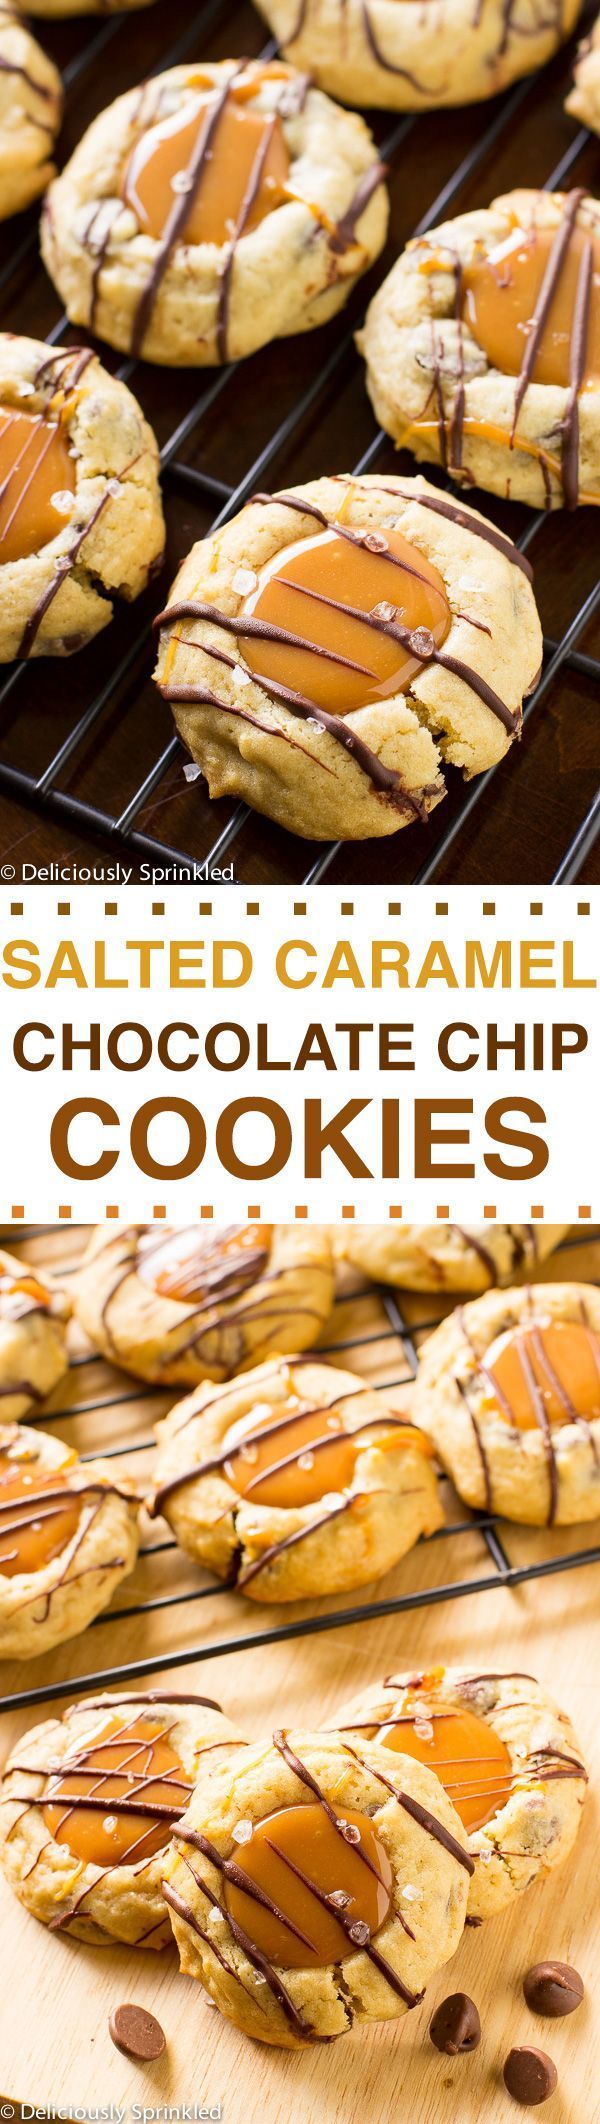 The BEST Salted Caramel Chocolate Chip Cookies